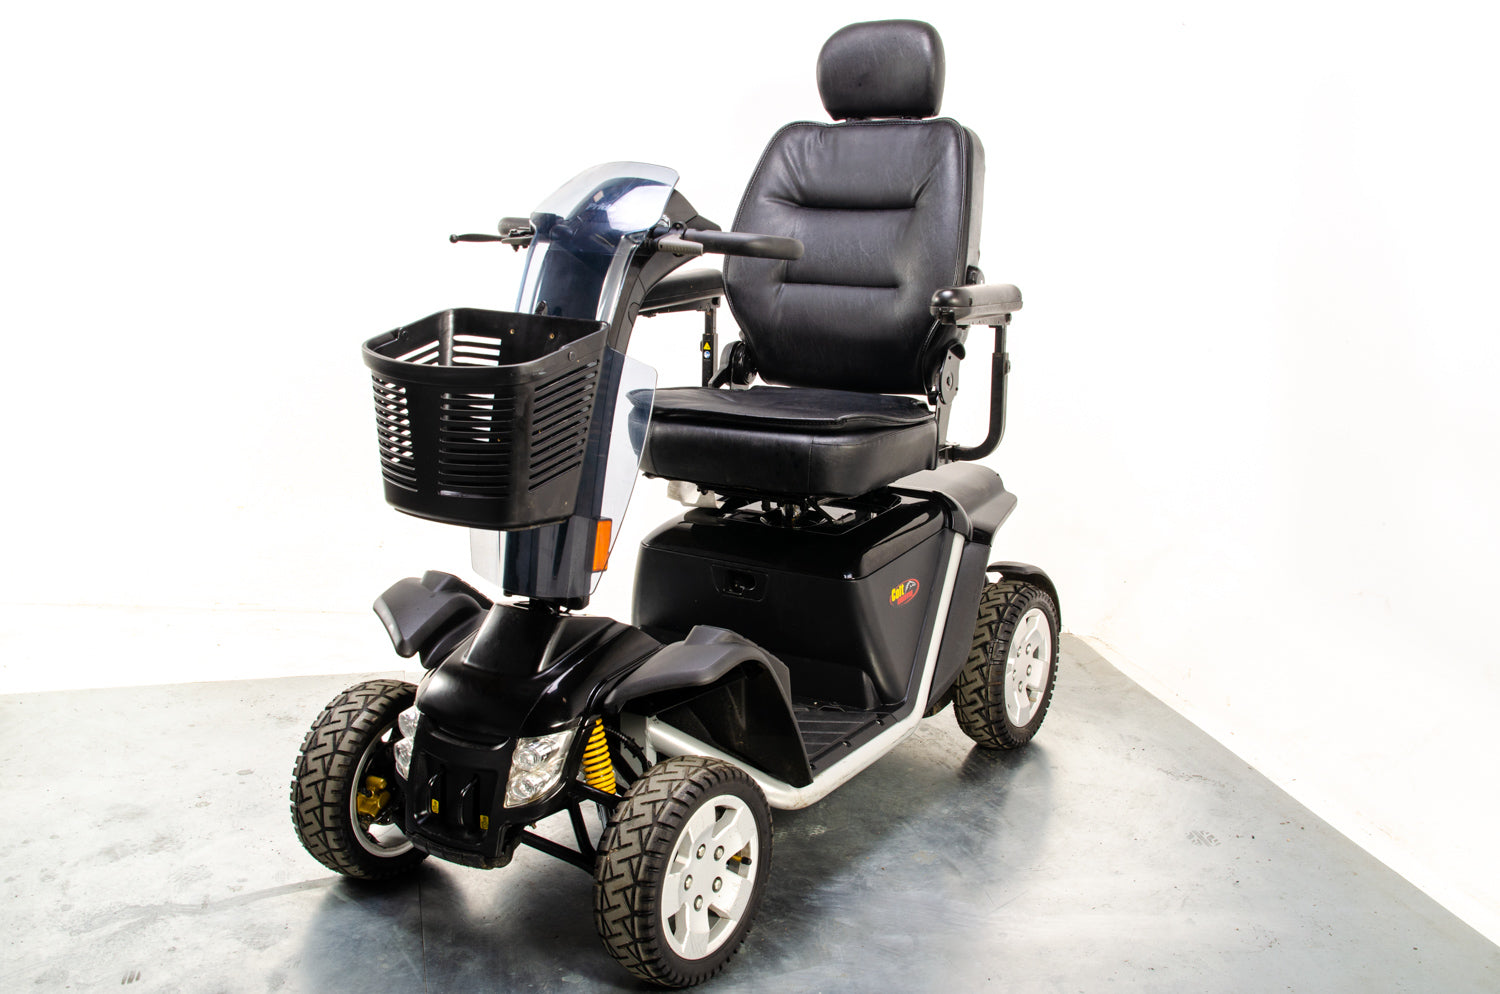 Pride Colt Executive Used Mobility Scooter All-Terrain Off-Road 8mph Road Legal Black 13417